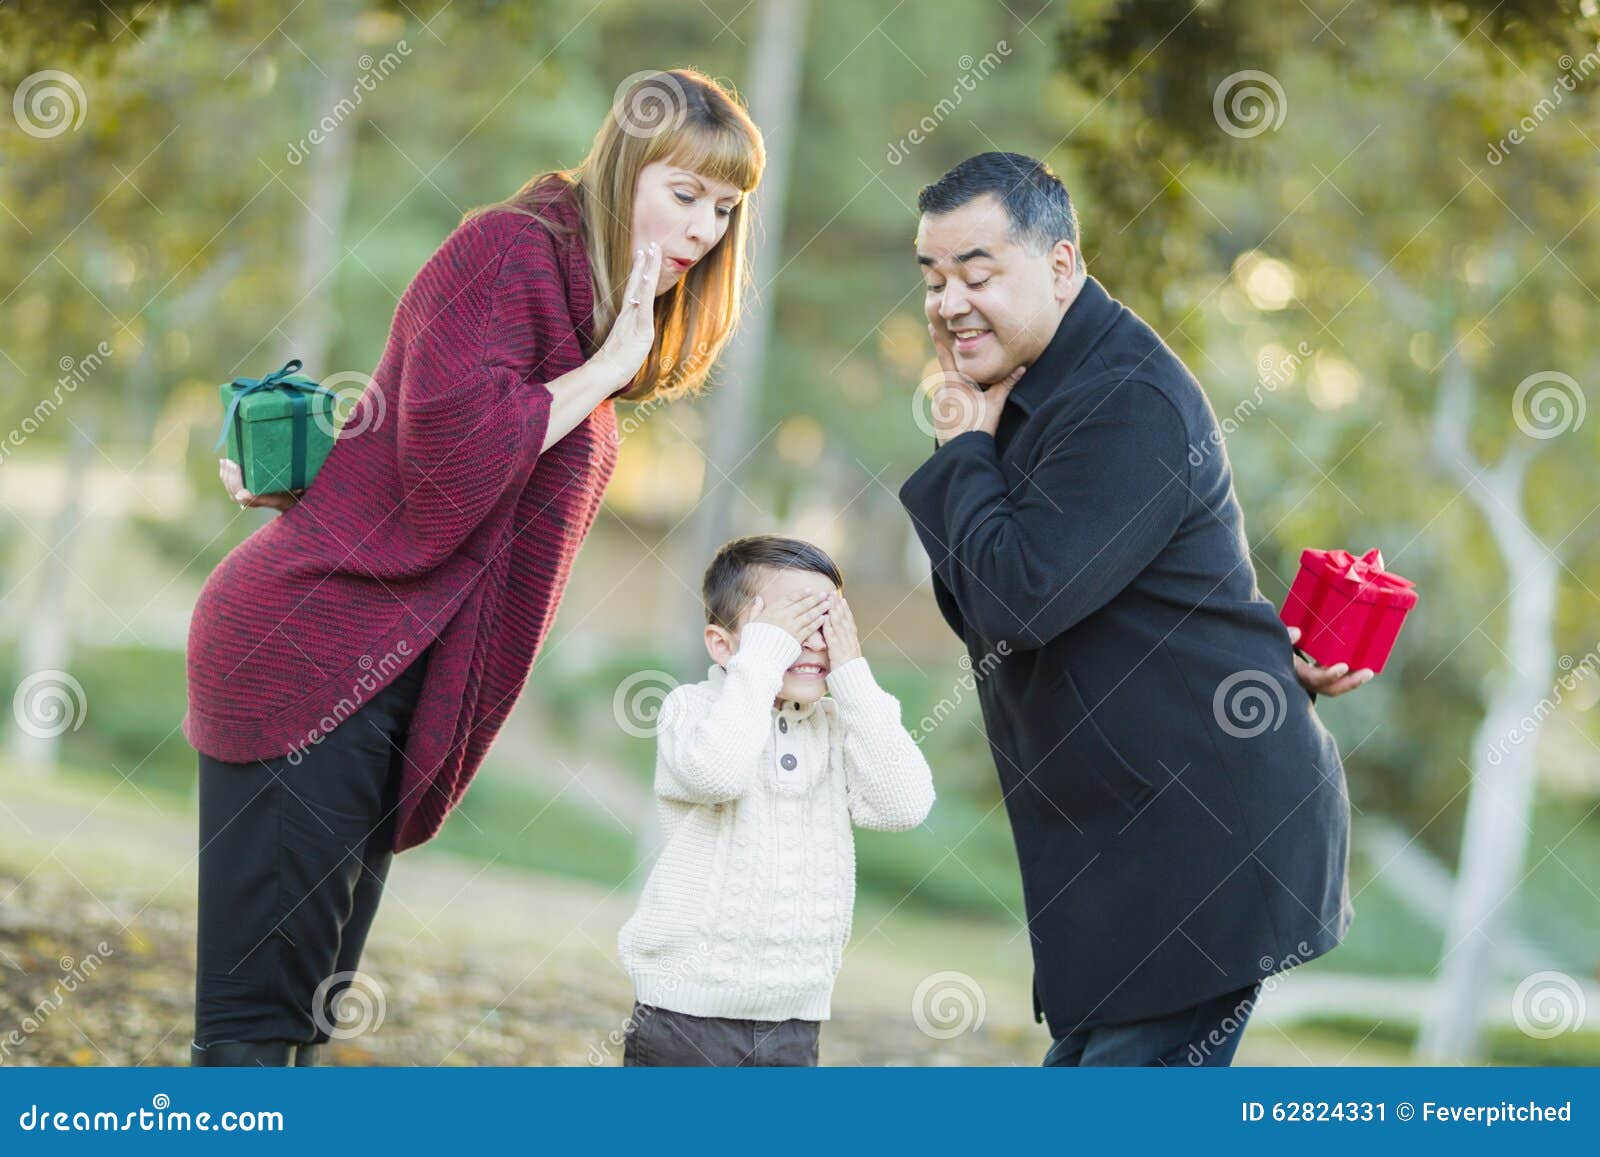 playful mixedrace parents with gifts for young boy hiding eyes